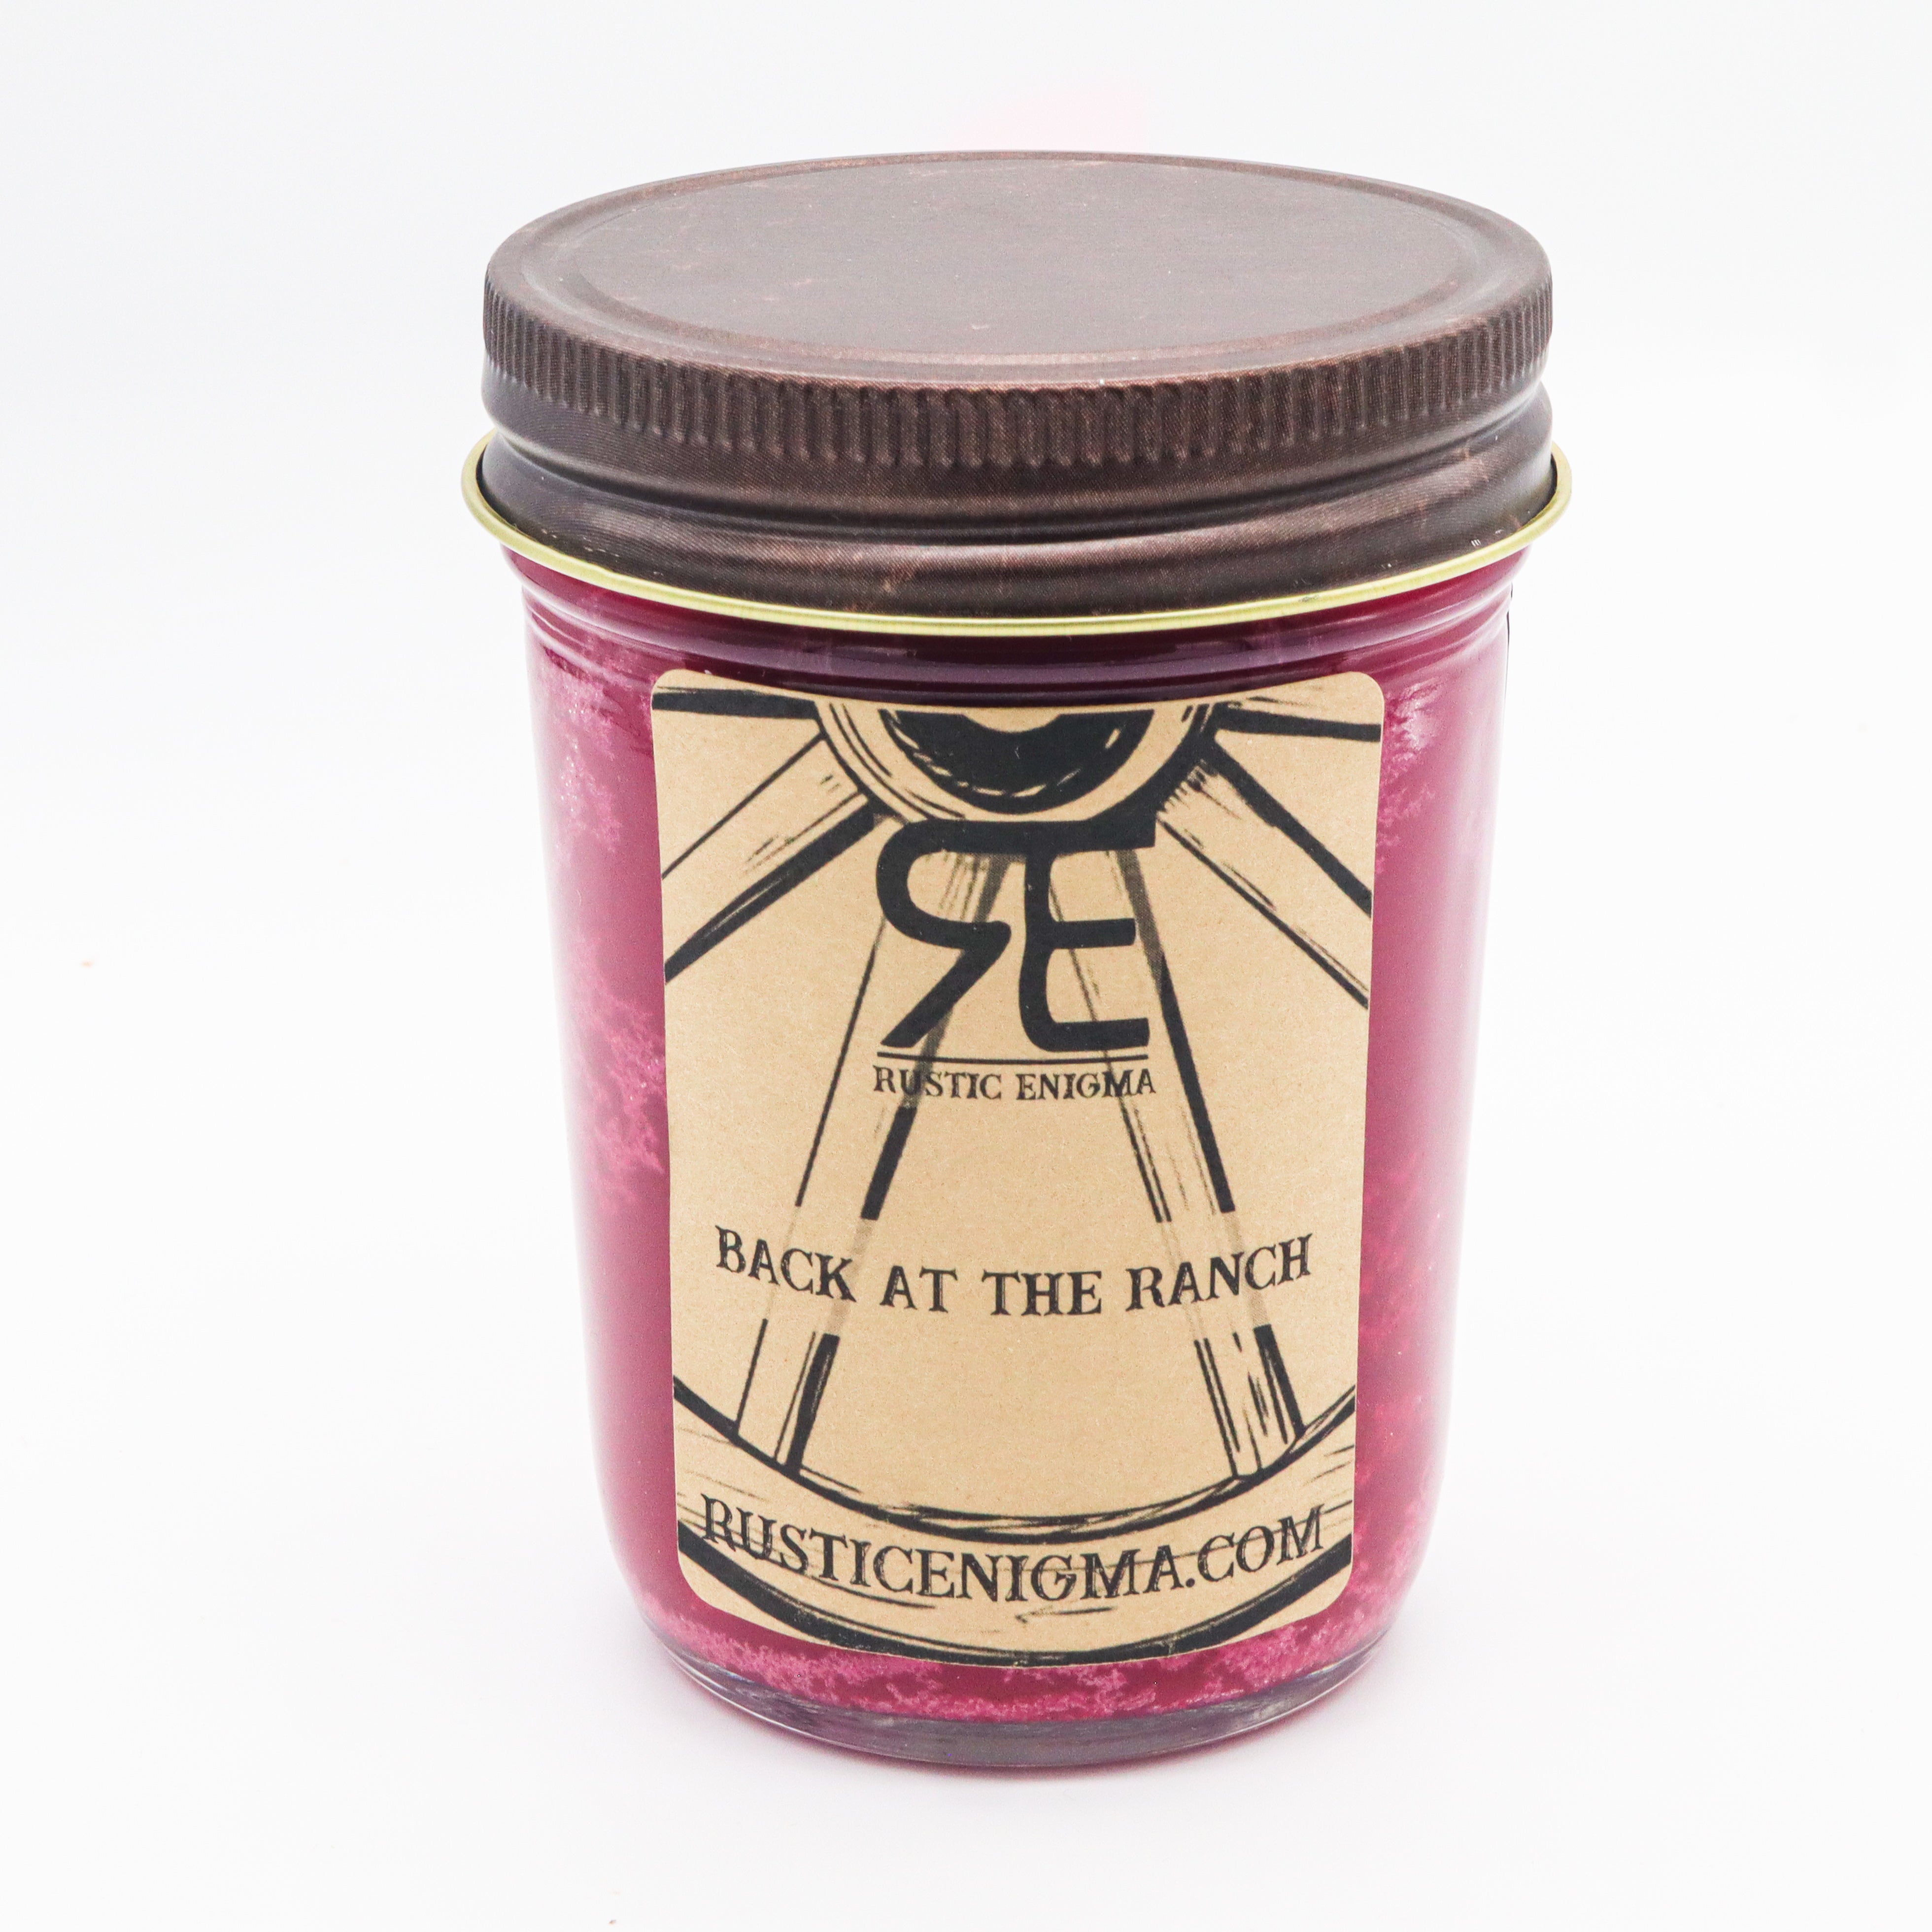 Back At The Ranch 8 oz Candle